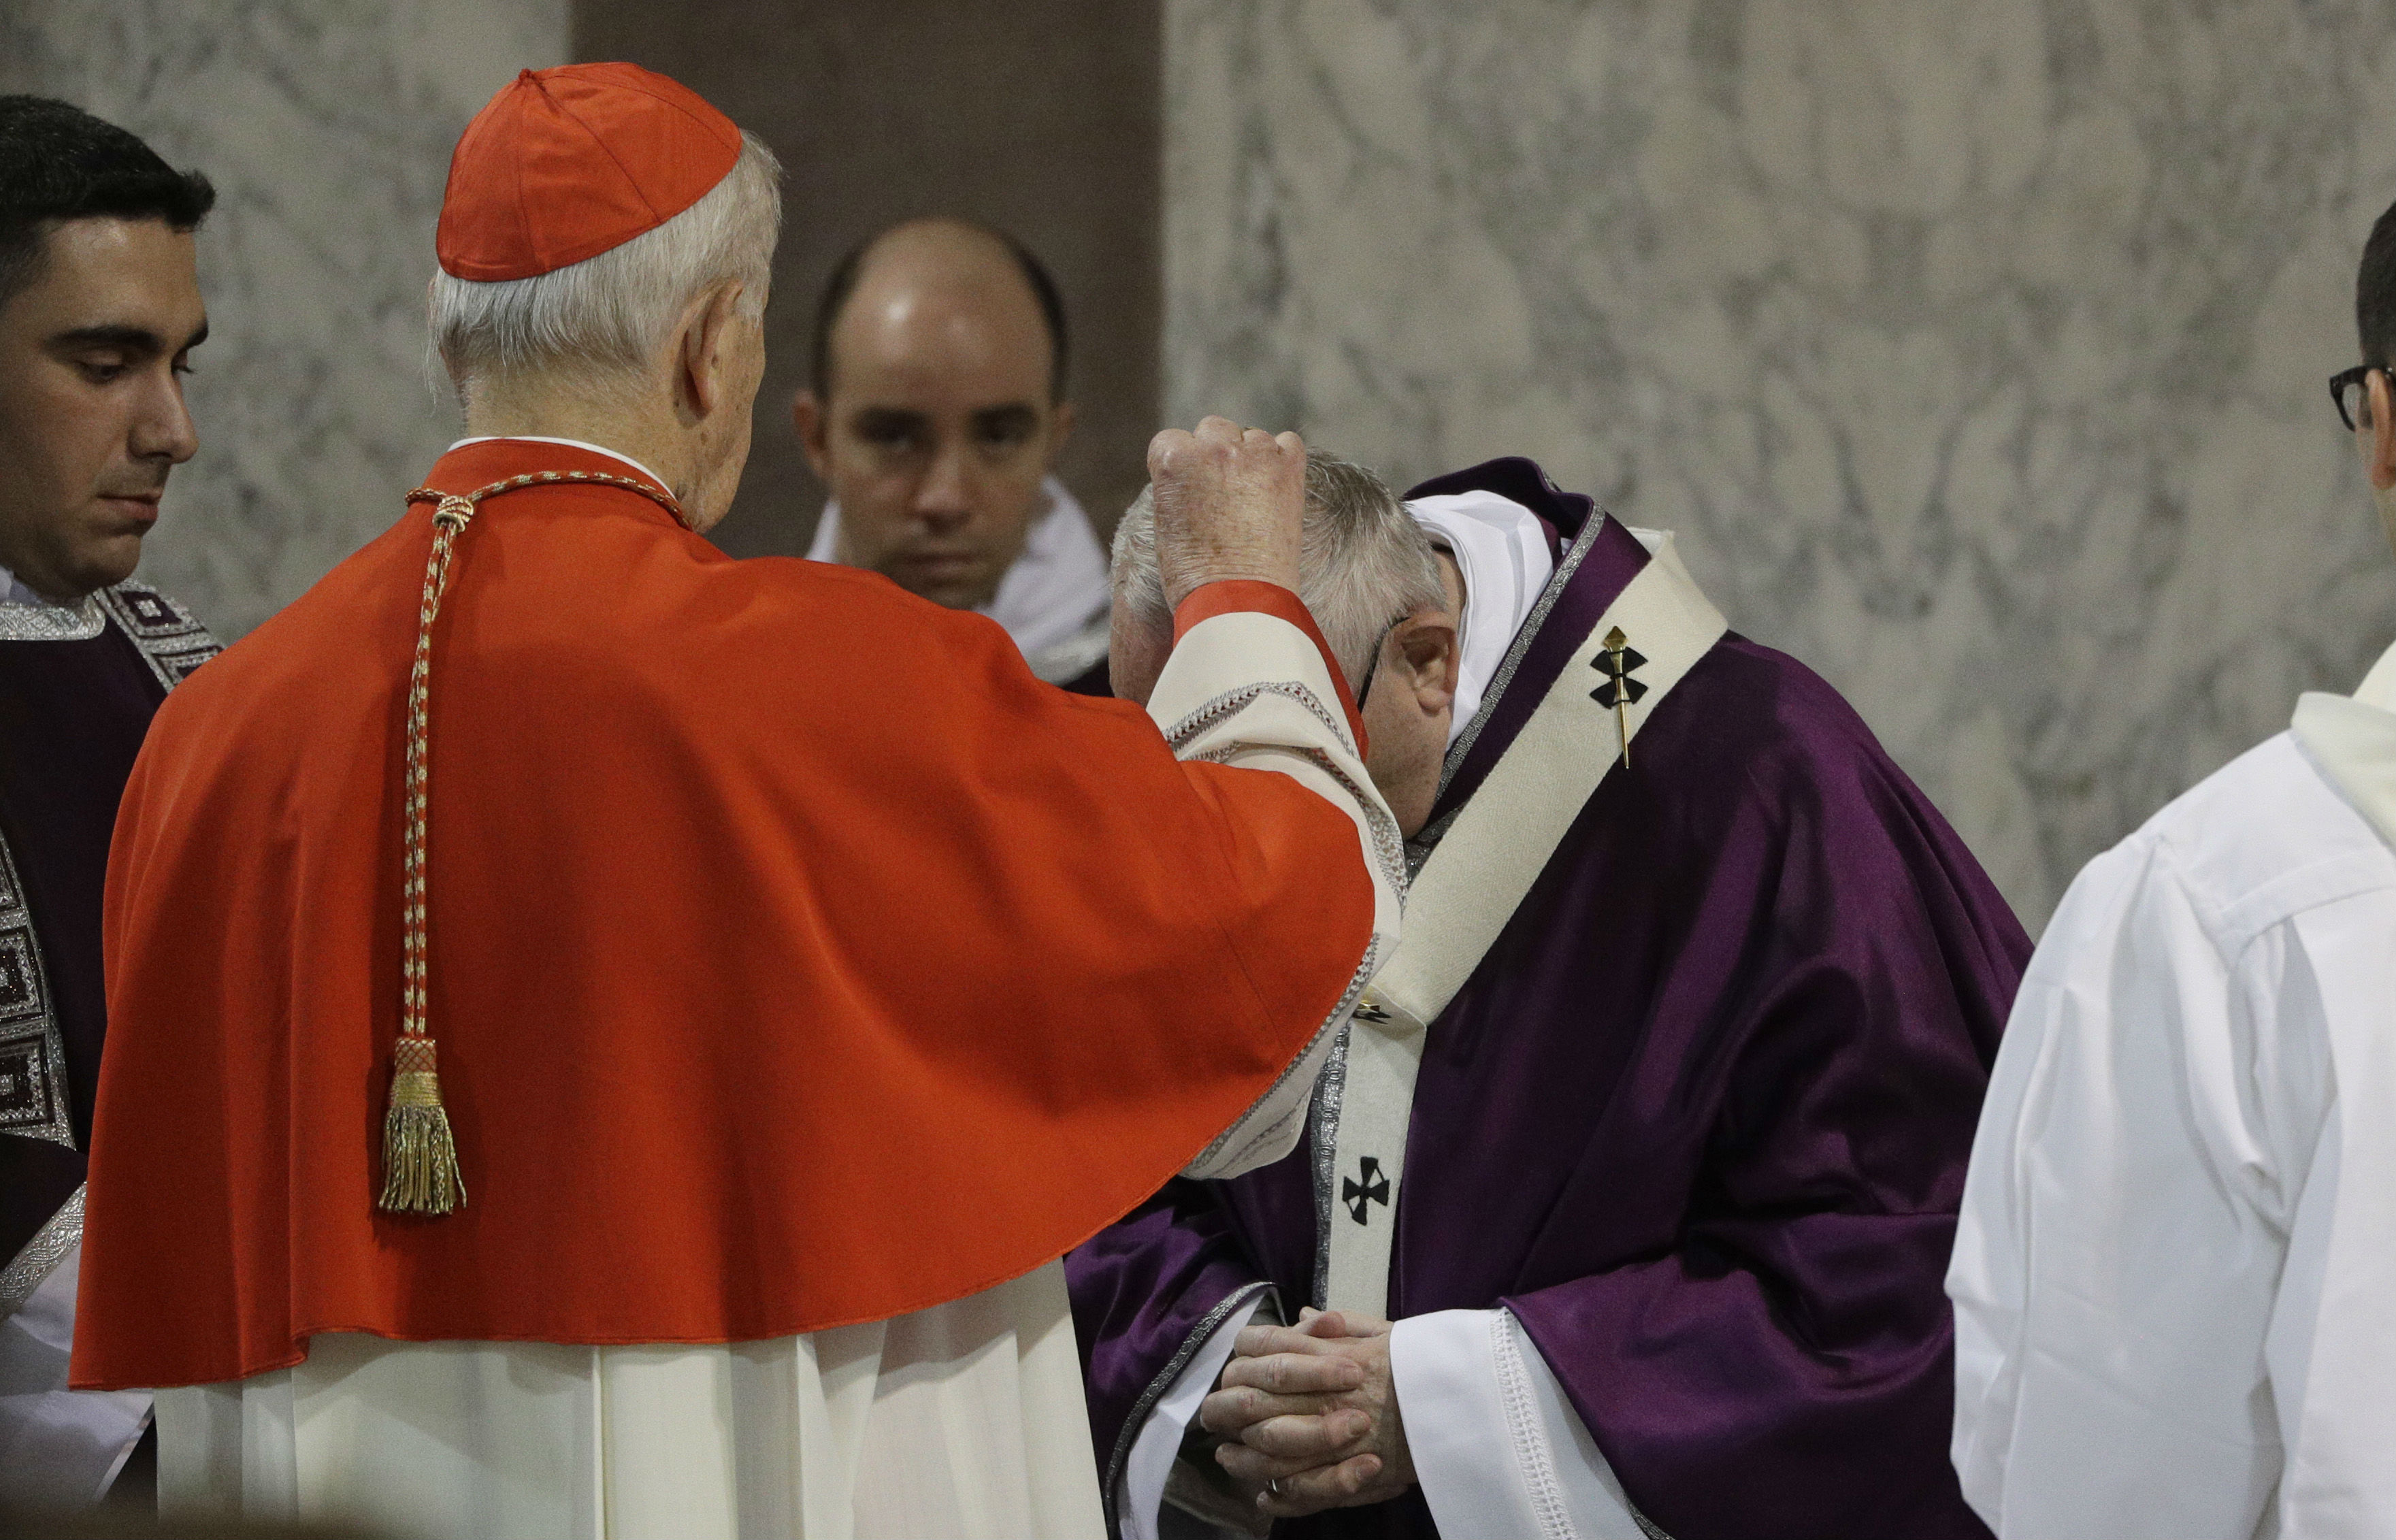 Lent is a time to say no to the asphyxia of selfishness and 'silent indifference', says Pope